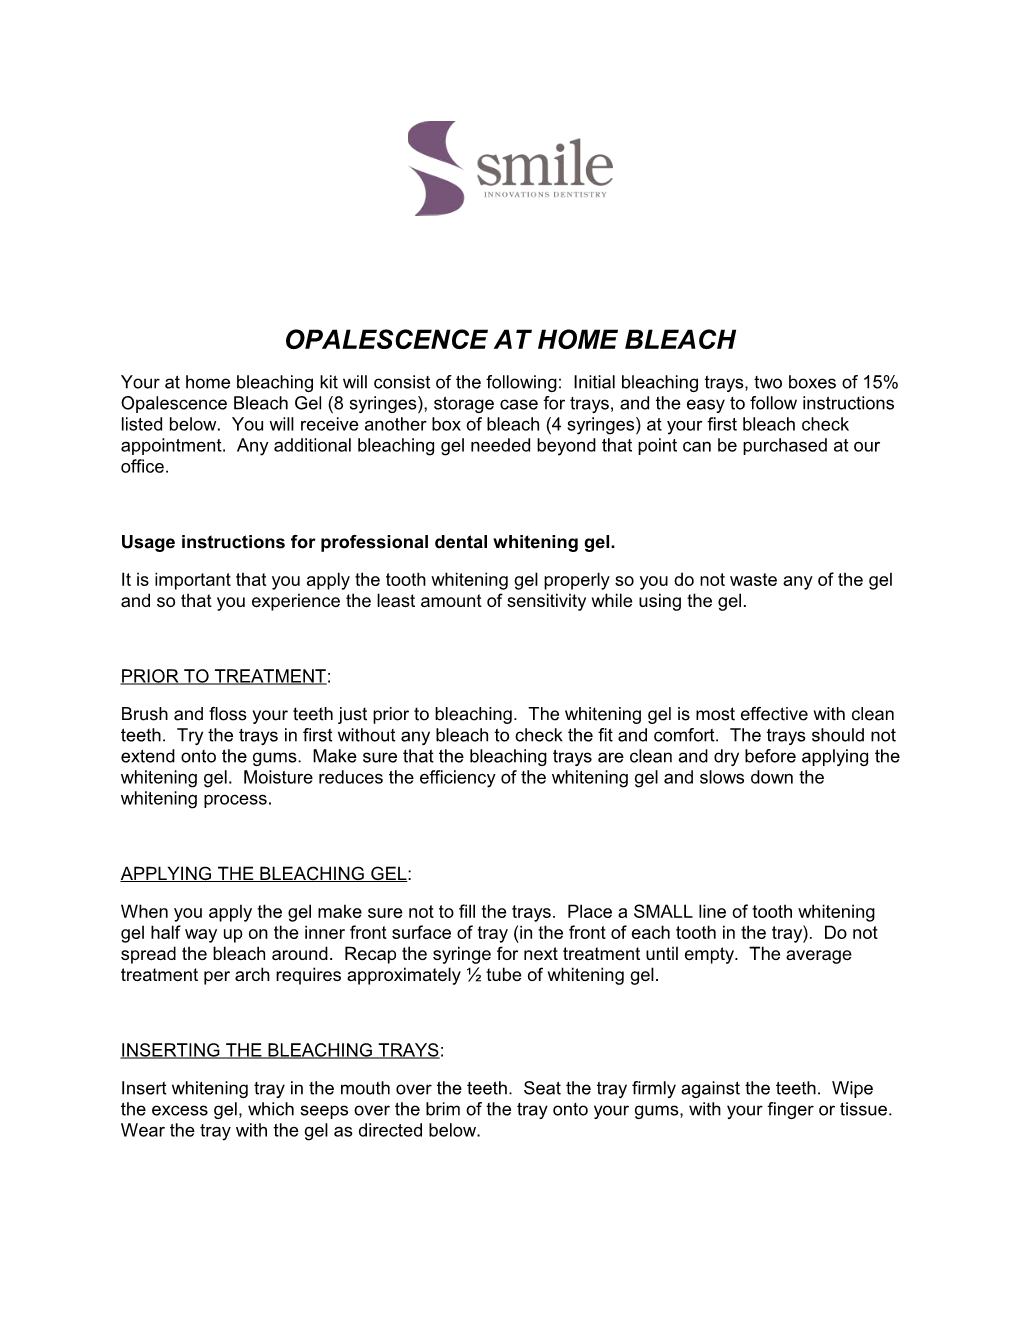 Usage Instructions for Professional Dental Whitening Gel